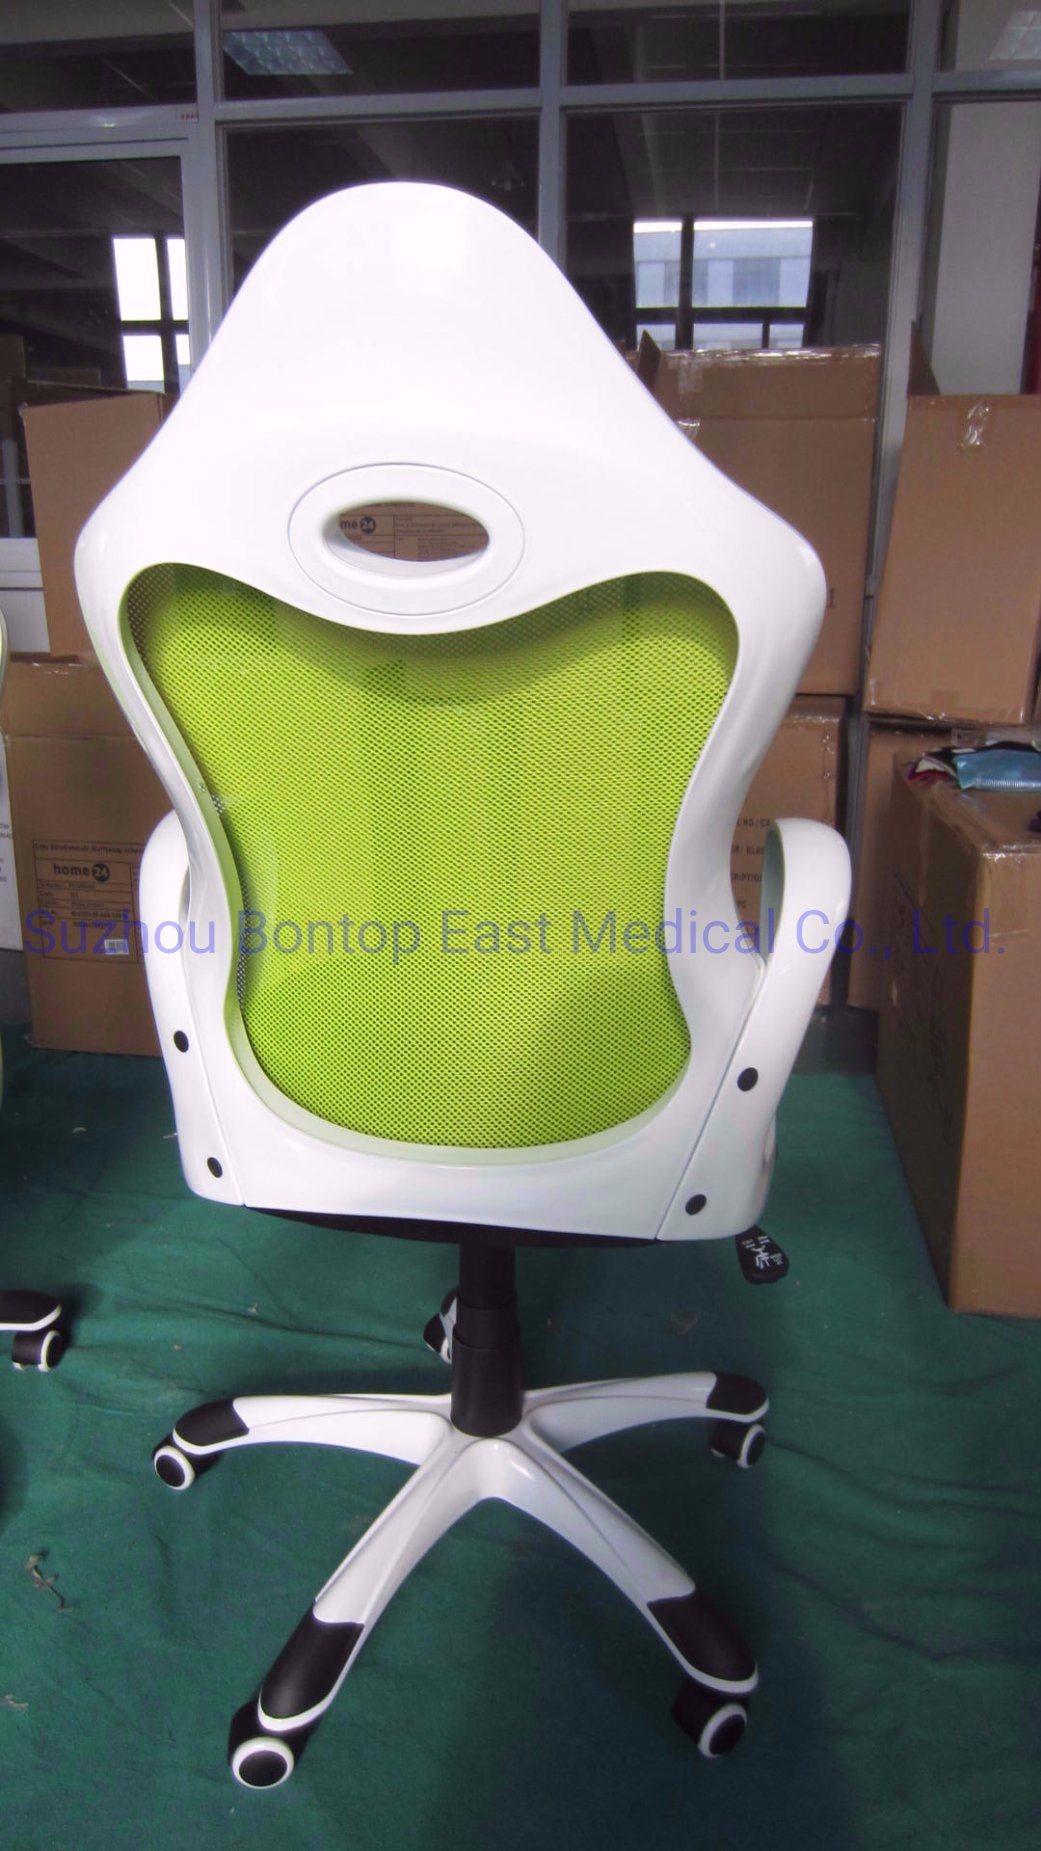 High Back Ergonomic Office Manager Boss Staff Computer Conference PU Leather Gaming Chair